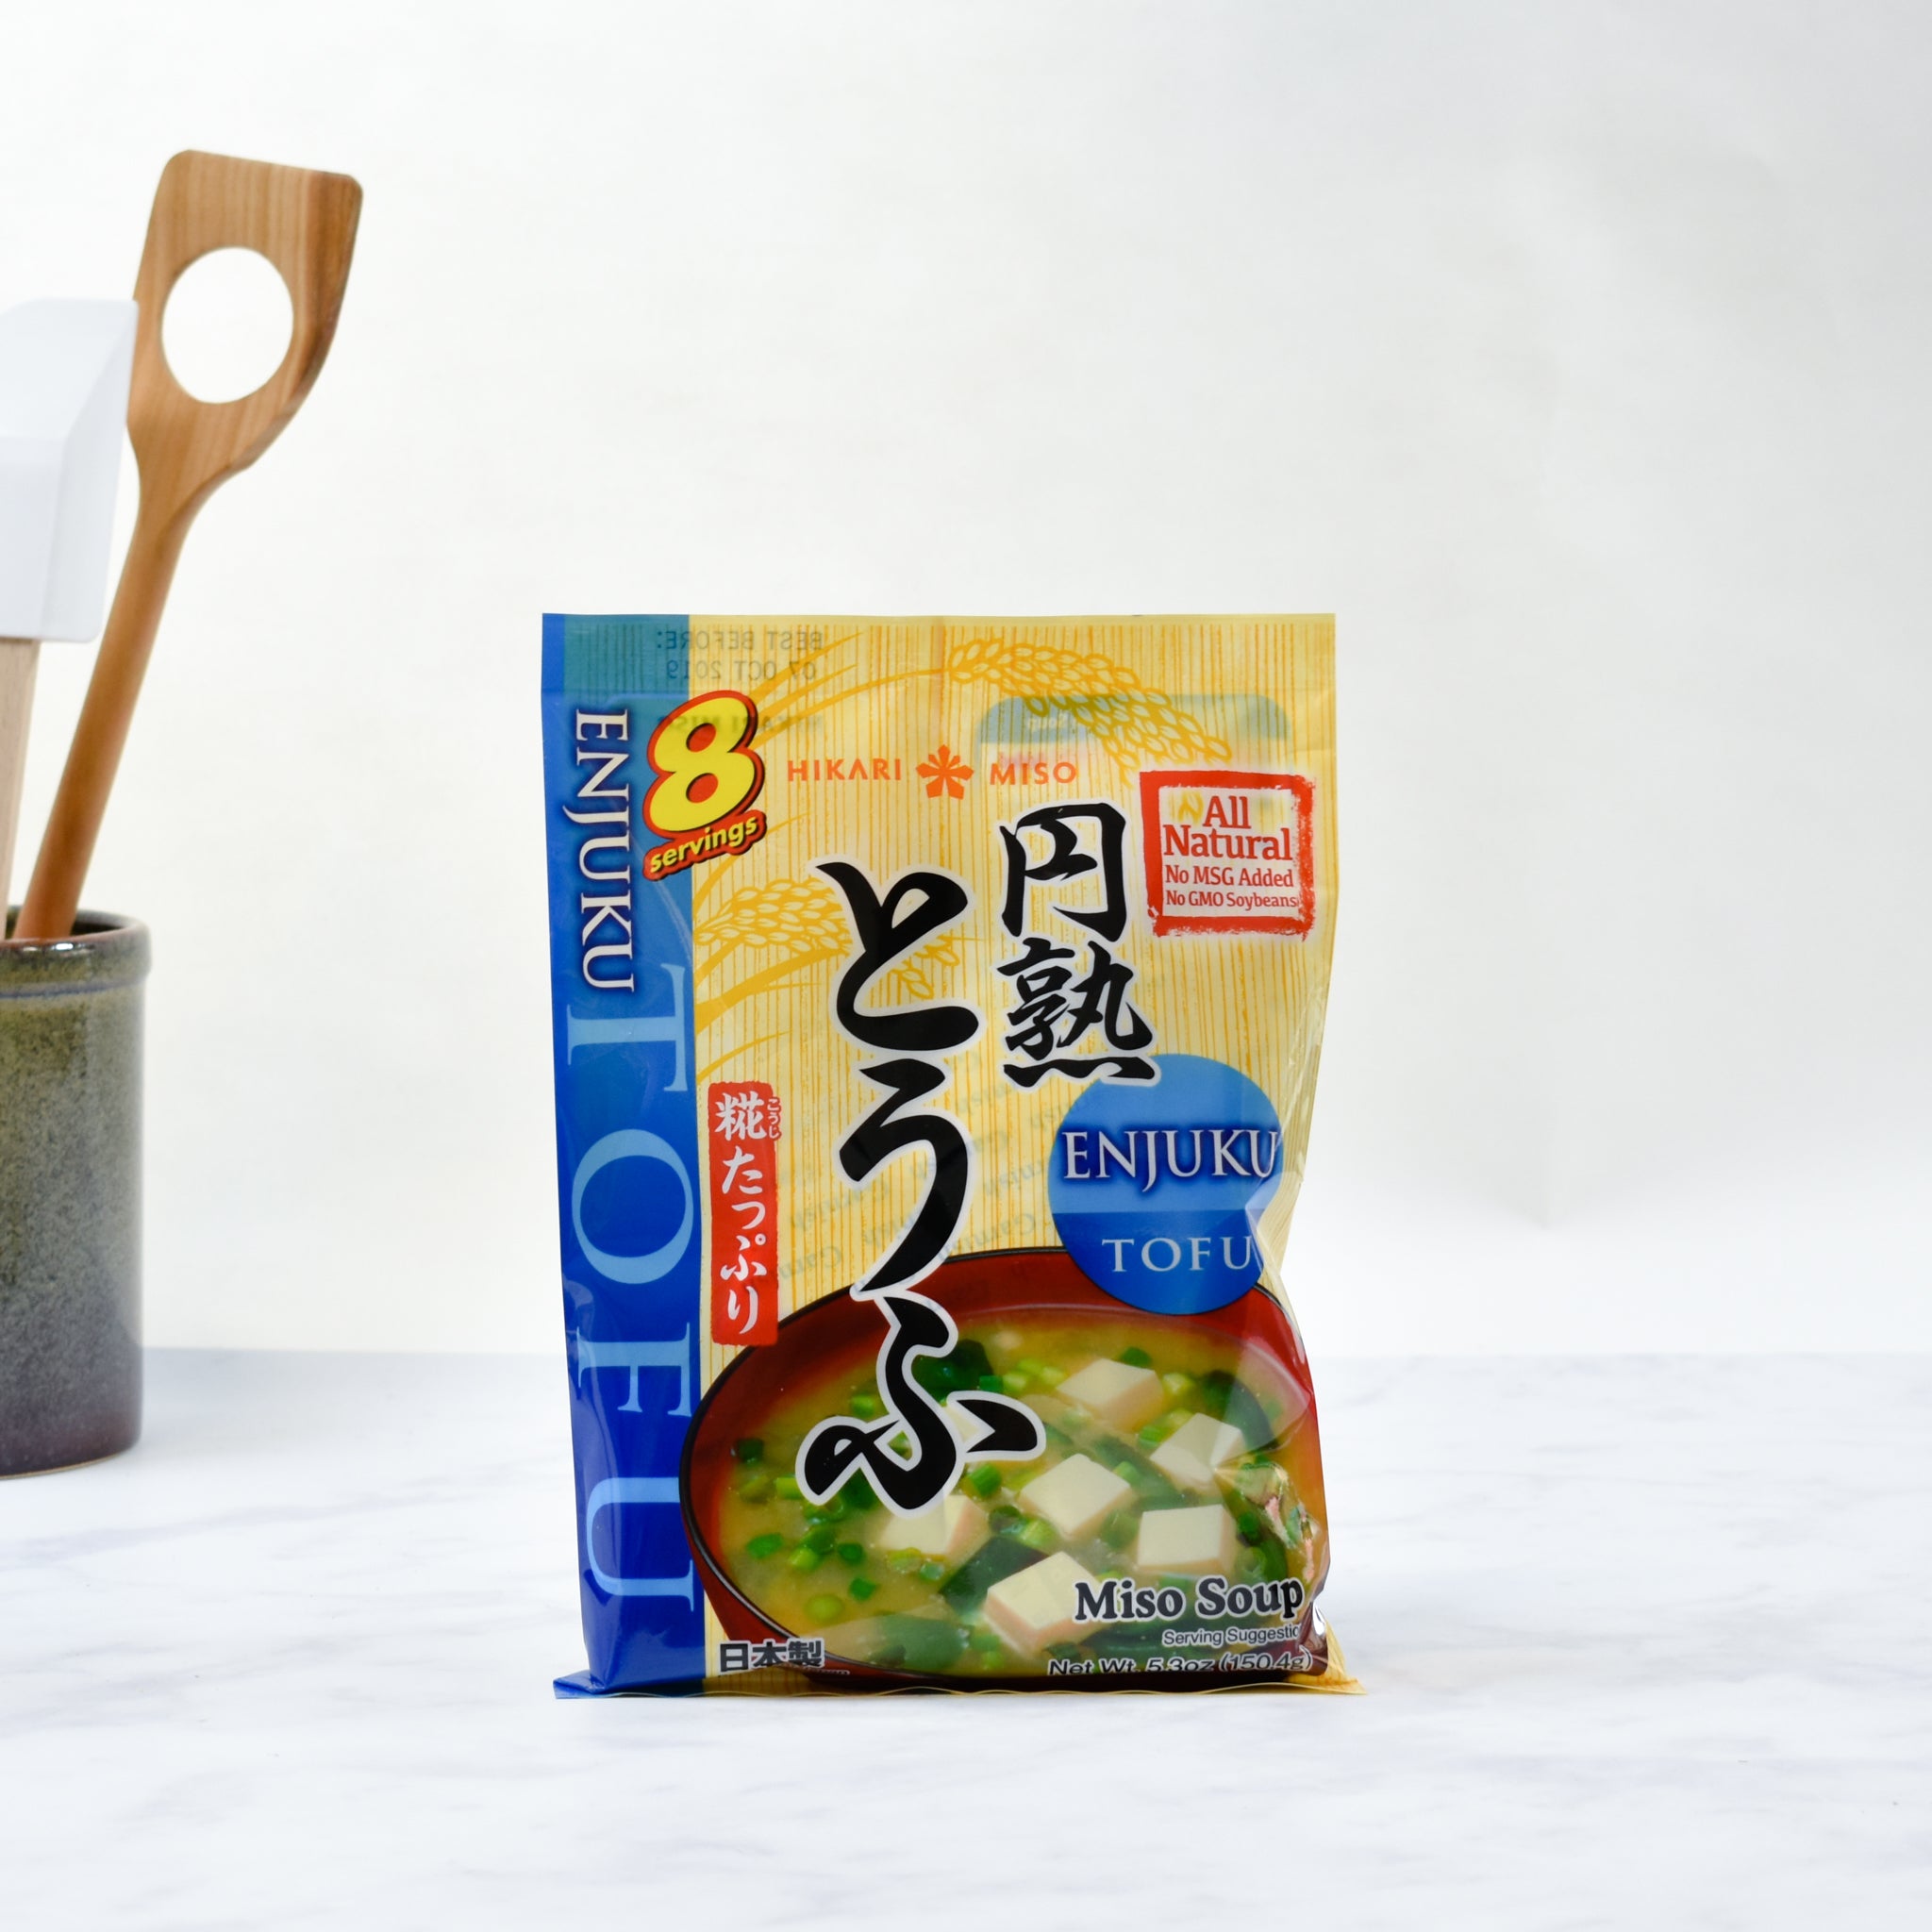 Instant Miso Soup With Tofu, 8 x 22g servings